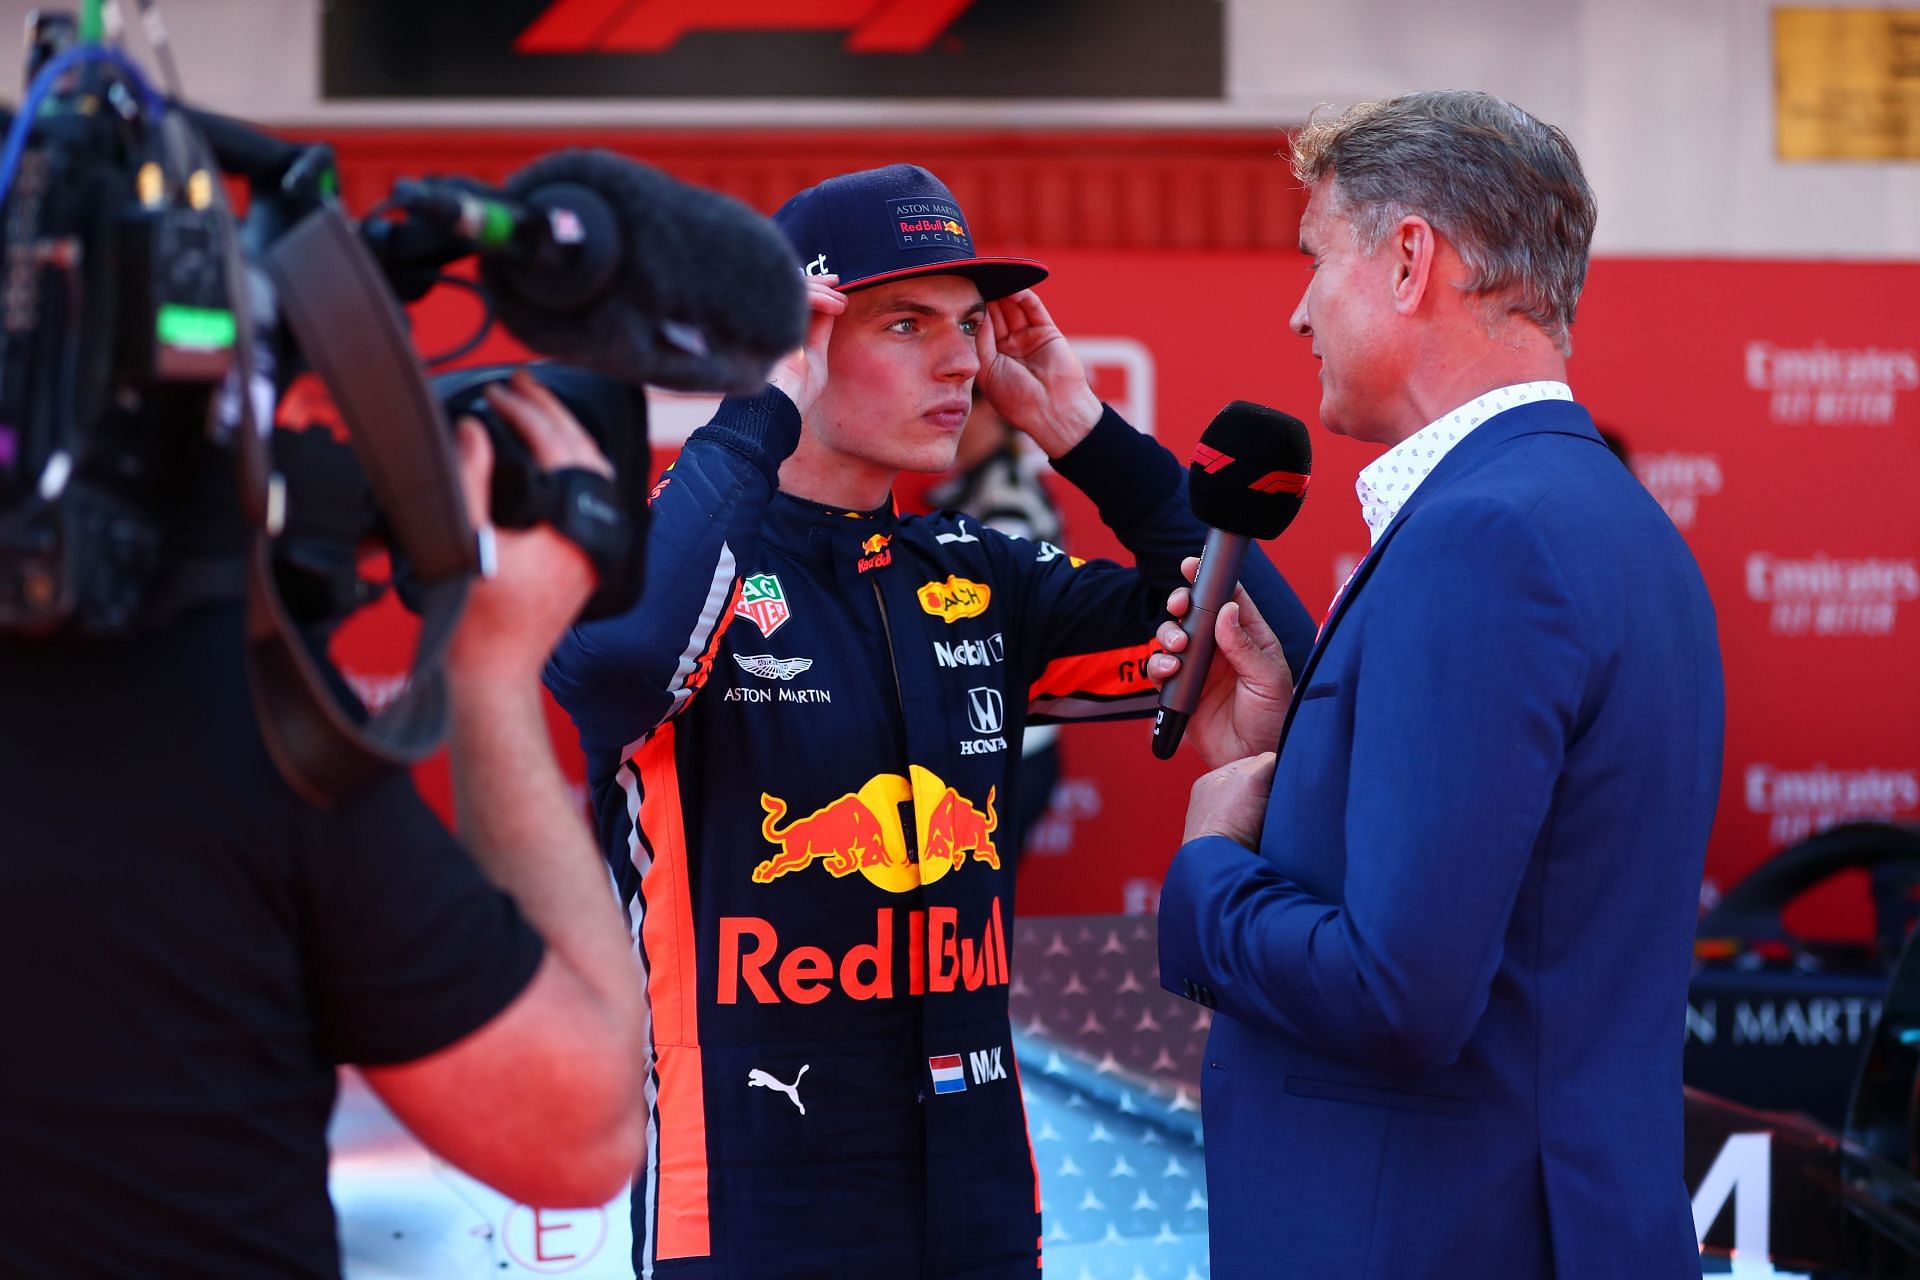 David Coulthard (right) interviews Max Verstappen after the 2019 Spanish Grand Prix